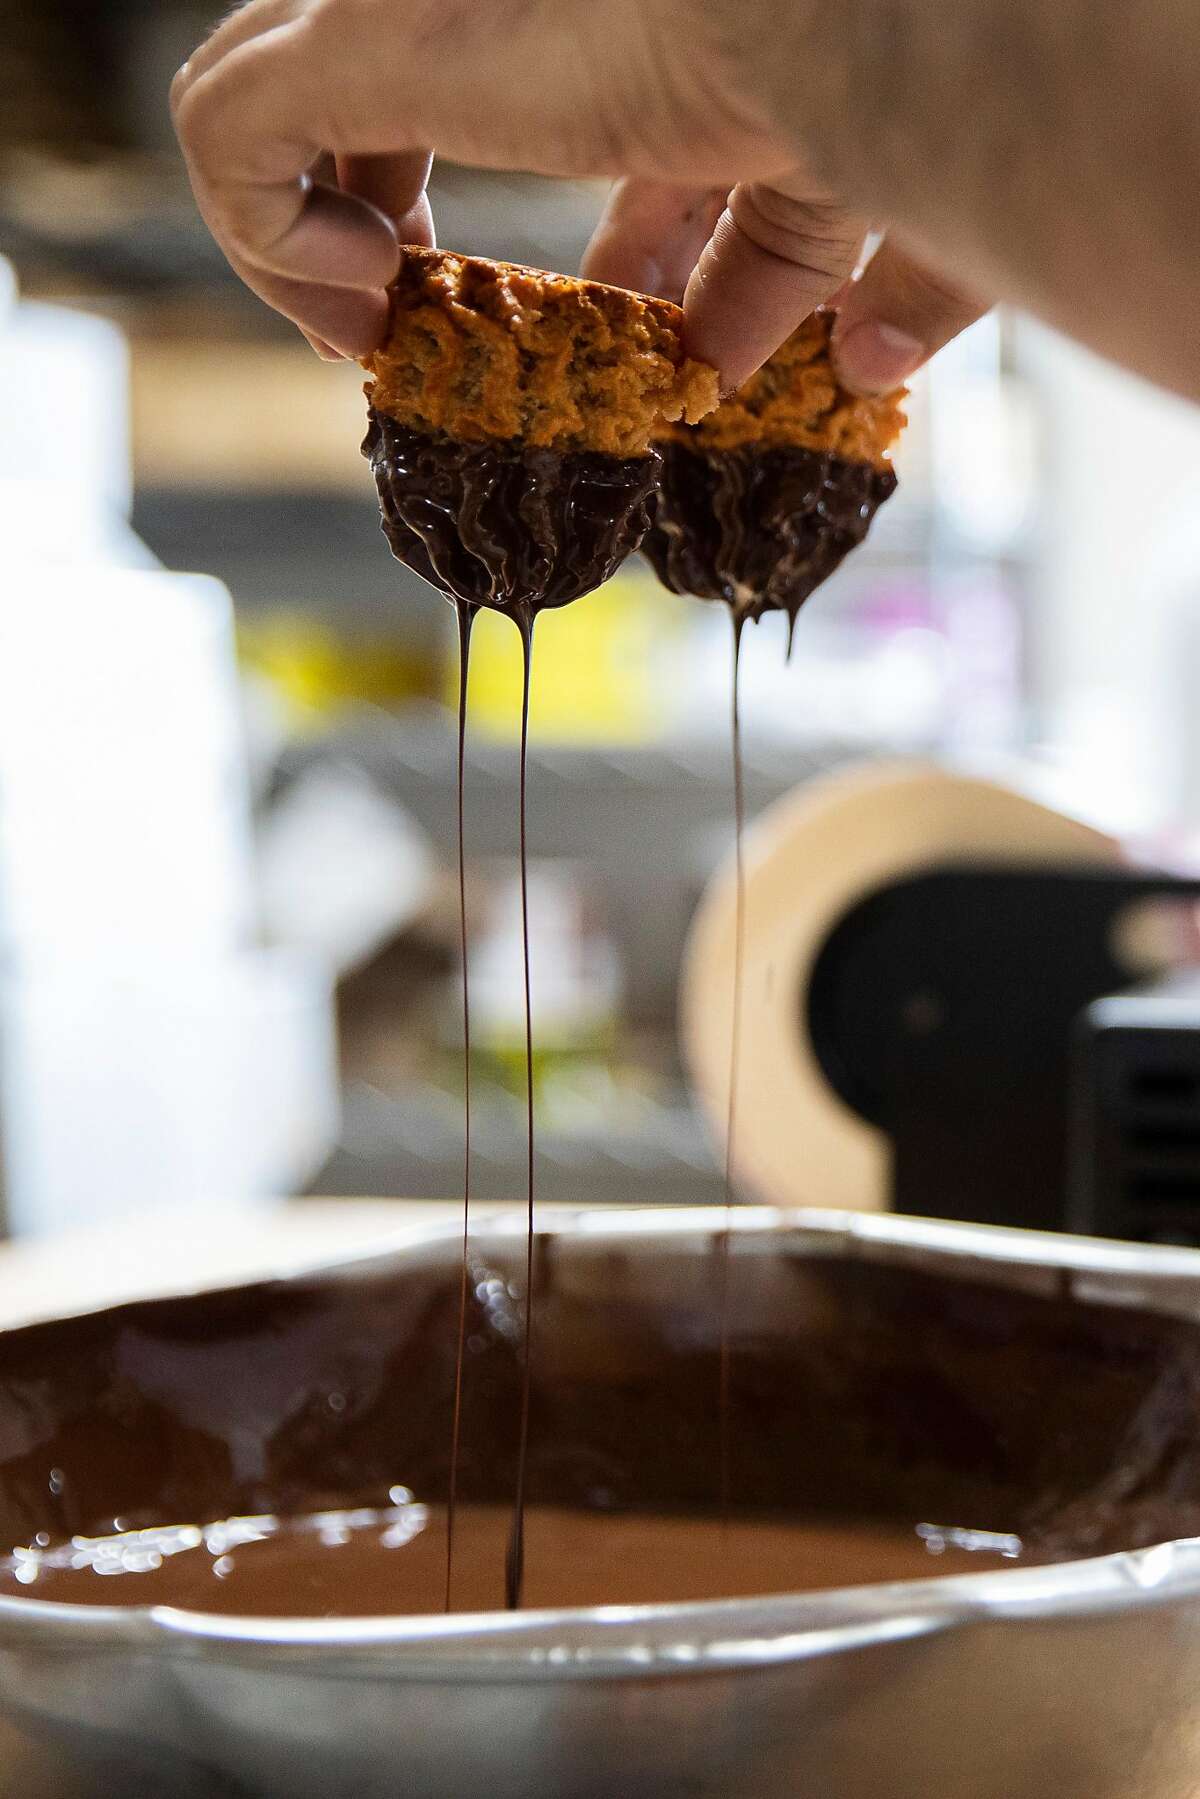 A Grand Bakery employee dips freshly baked macaroons in melted chocolate while preparing them for sale at Grand Bakery in Oakland, Calif. Monday, March 15, 2021. The Passover recipe featured on Grand Bakery's famous macaroons takes 5 hours to make.The Passover recipe feature on Grand Bakery's famous macaroons takes 5 hours to make.